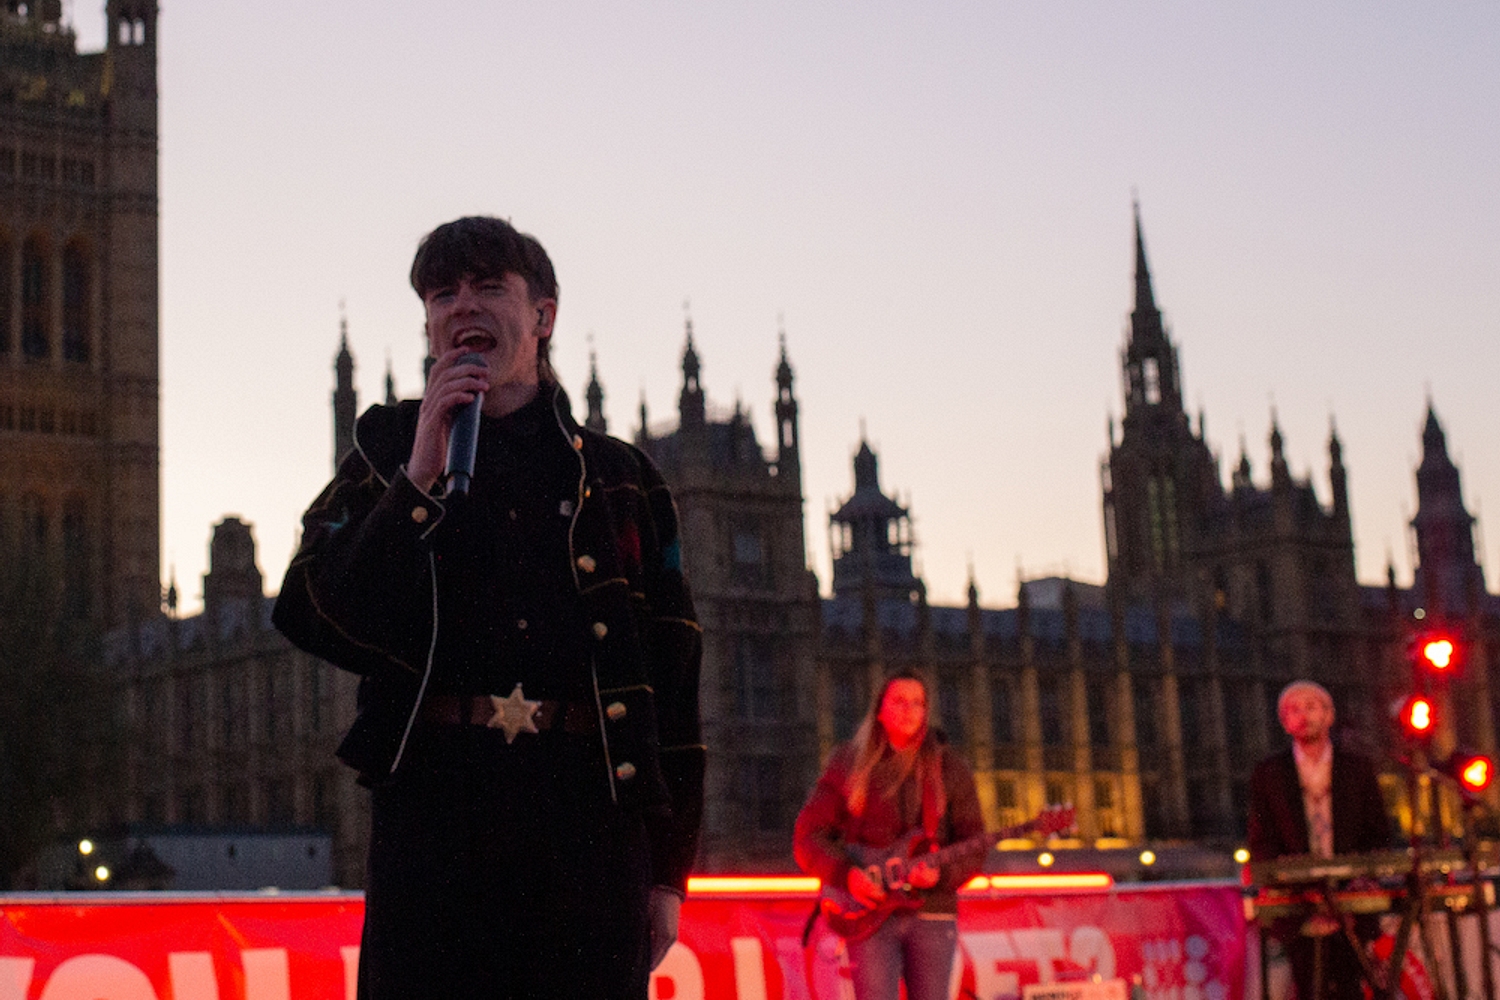 Declan McKenna performs ‘British Bombs’ outside the Houses of Parliament